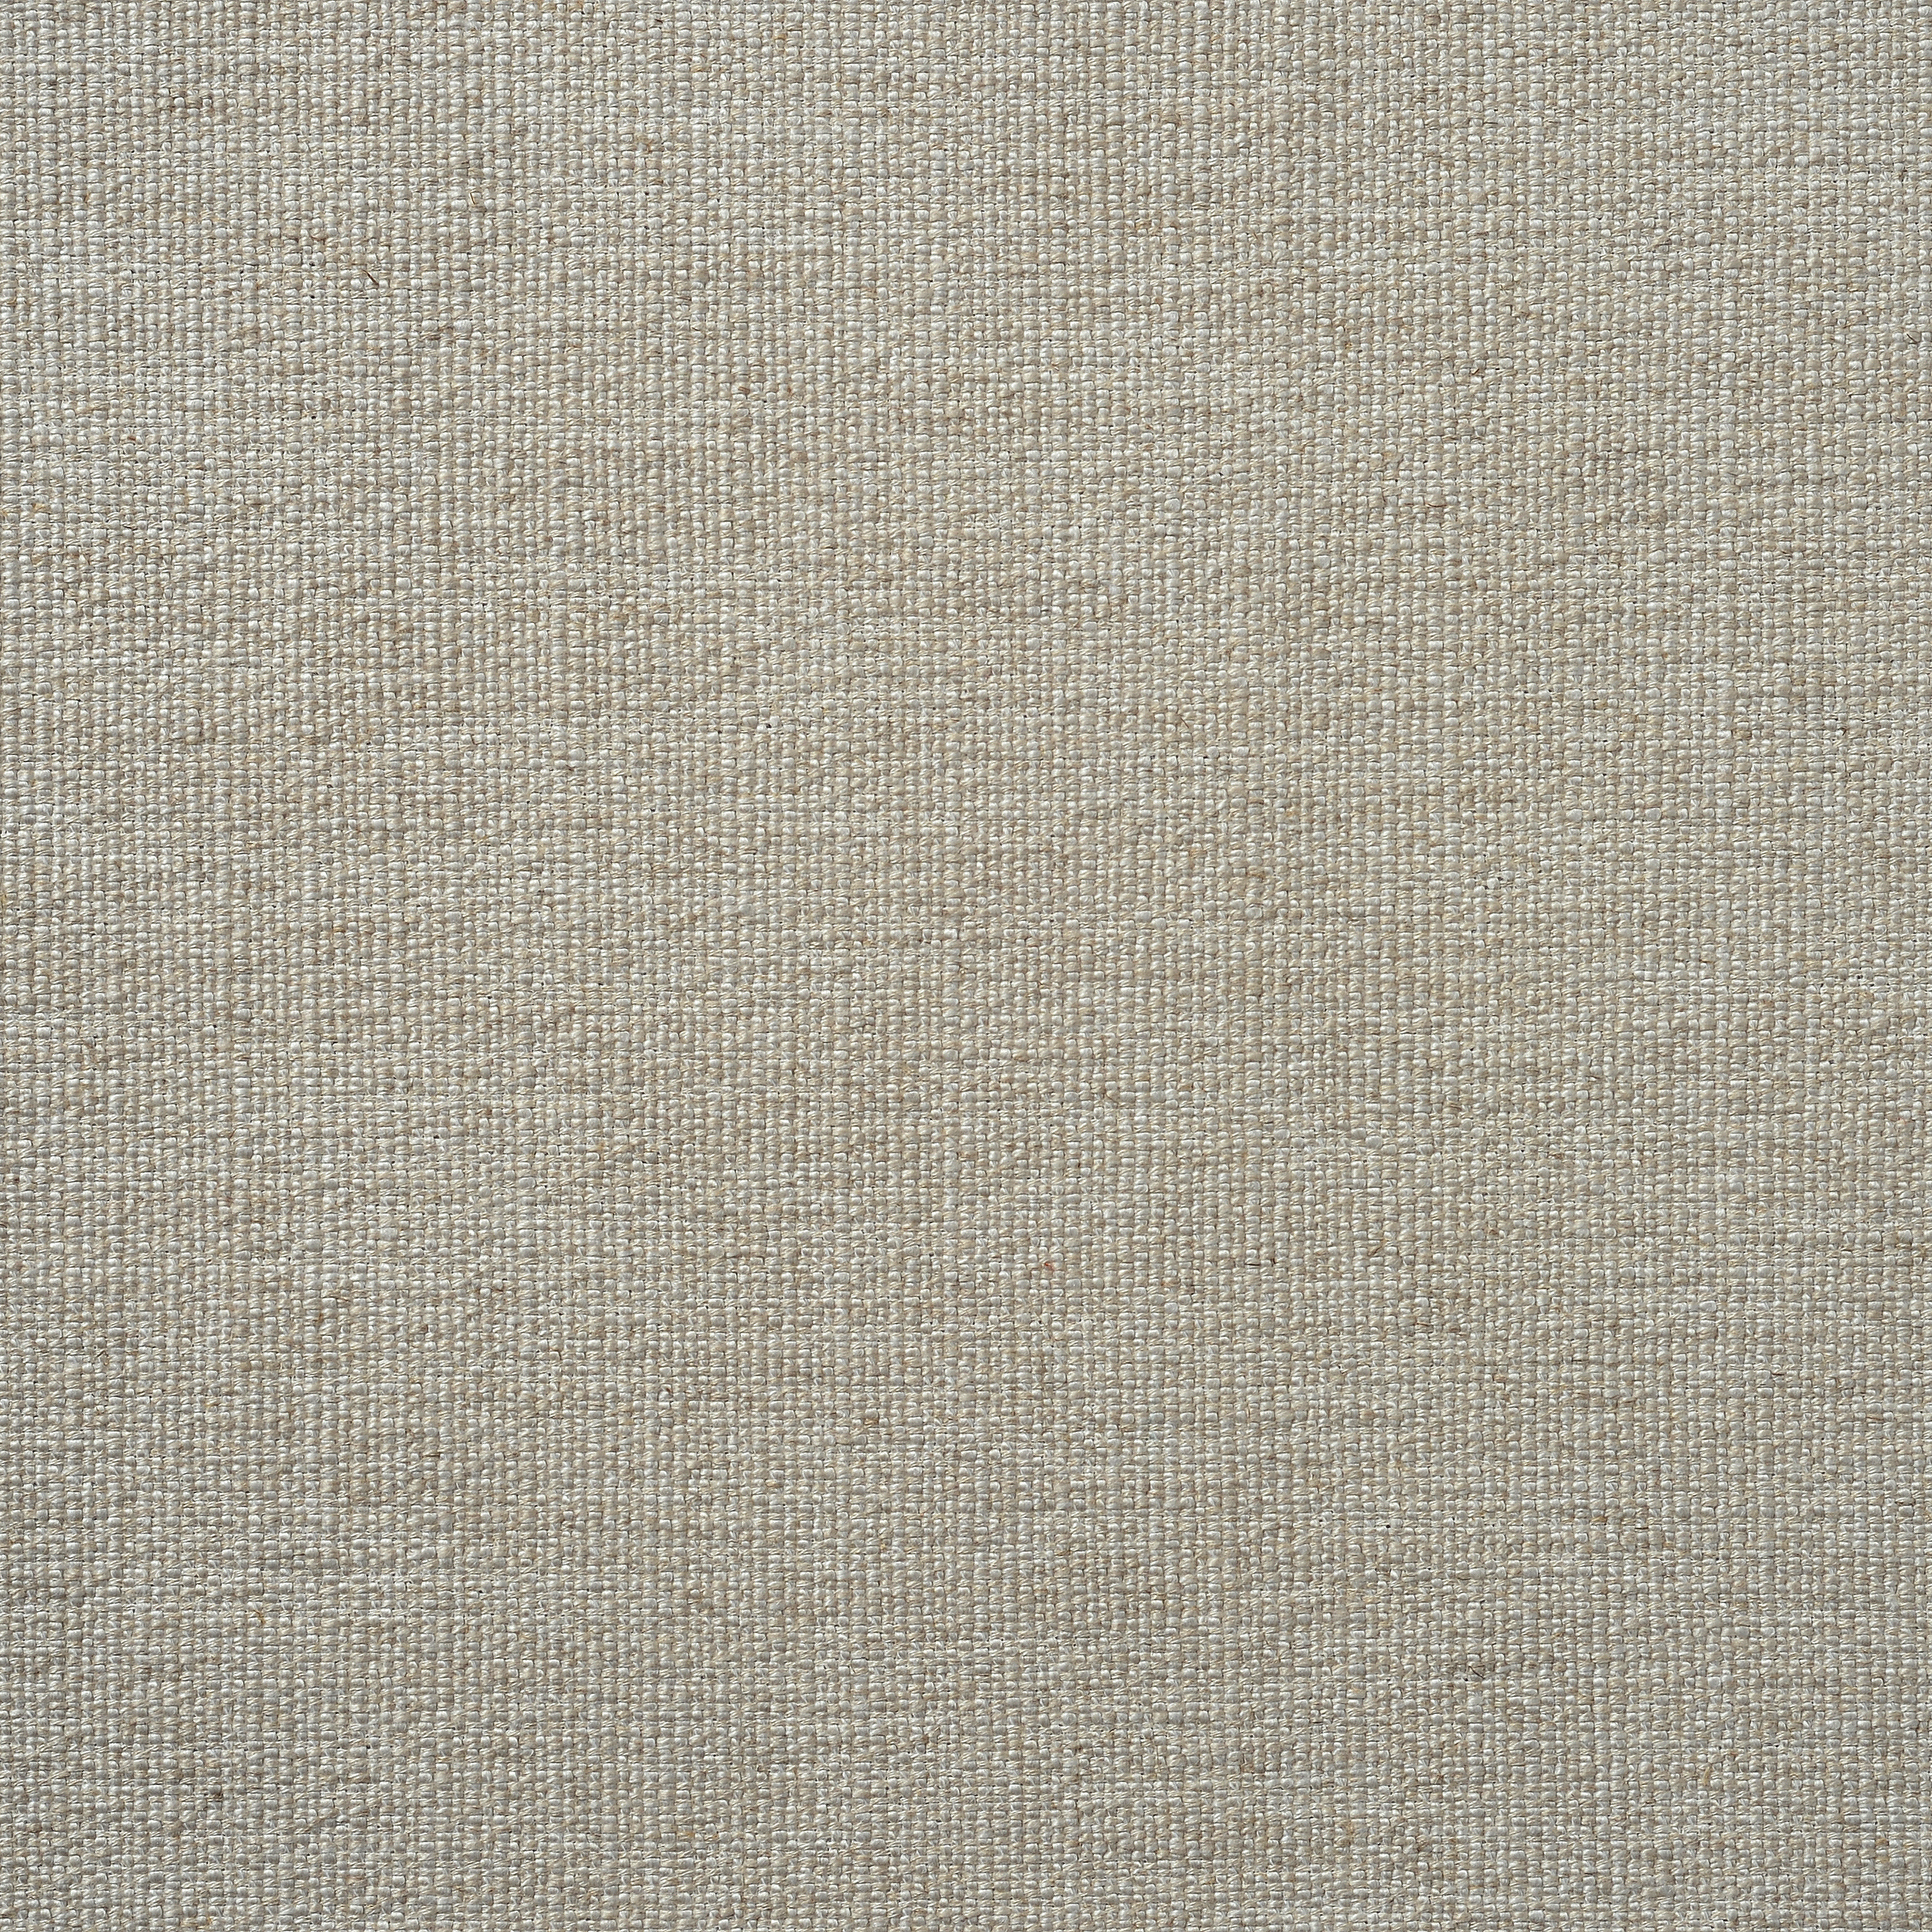 Chadwick Rustic Weave - Natural